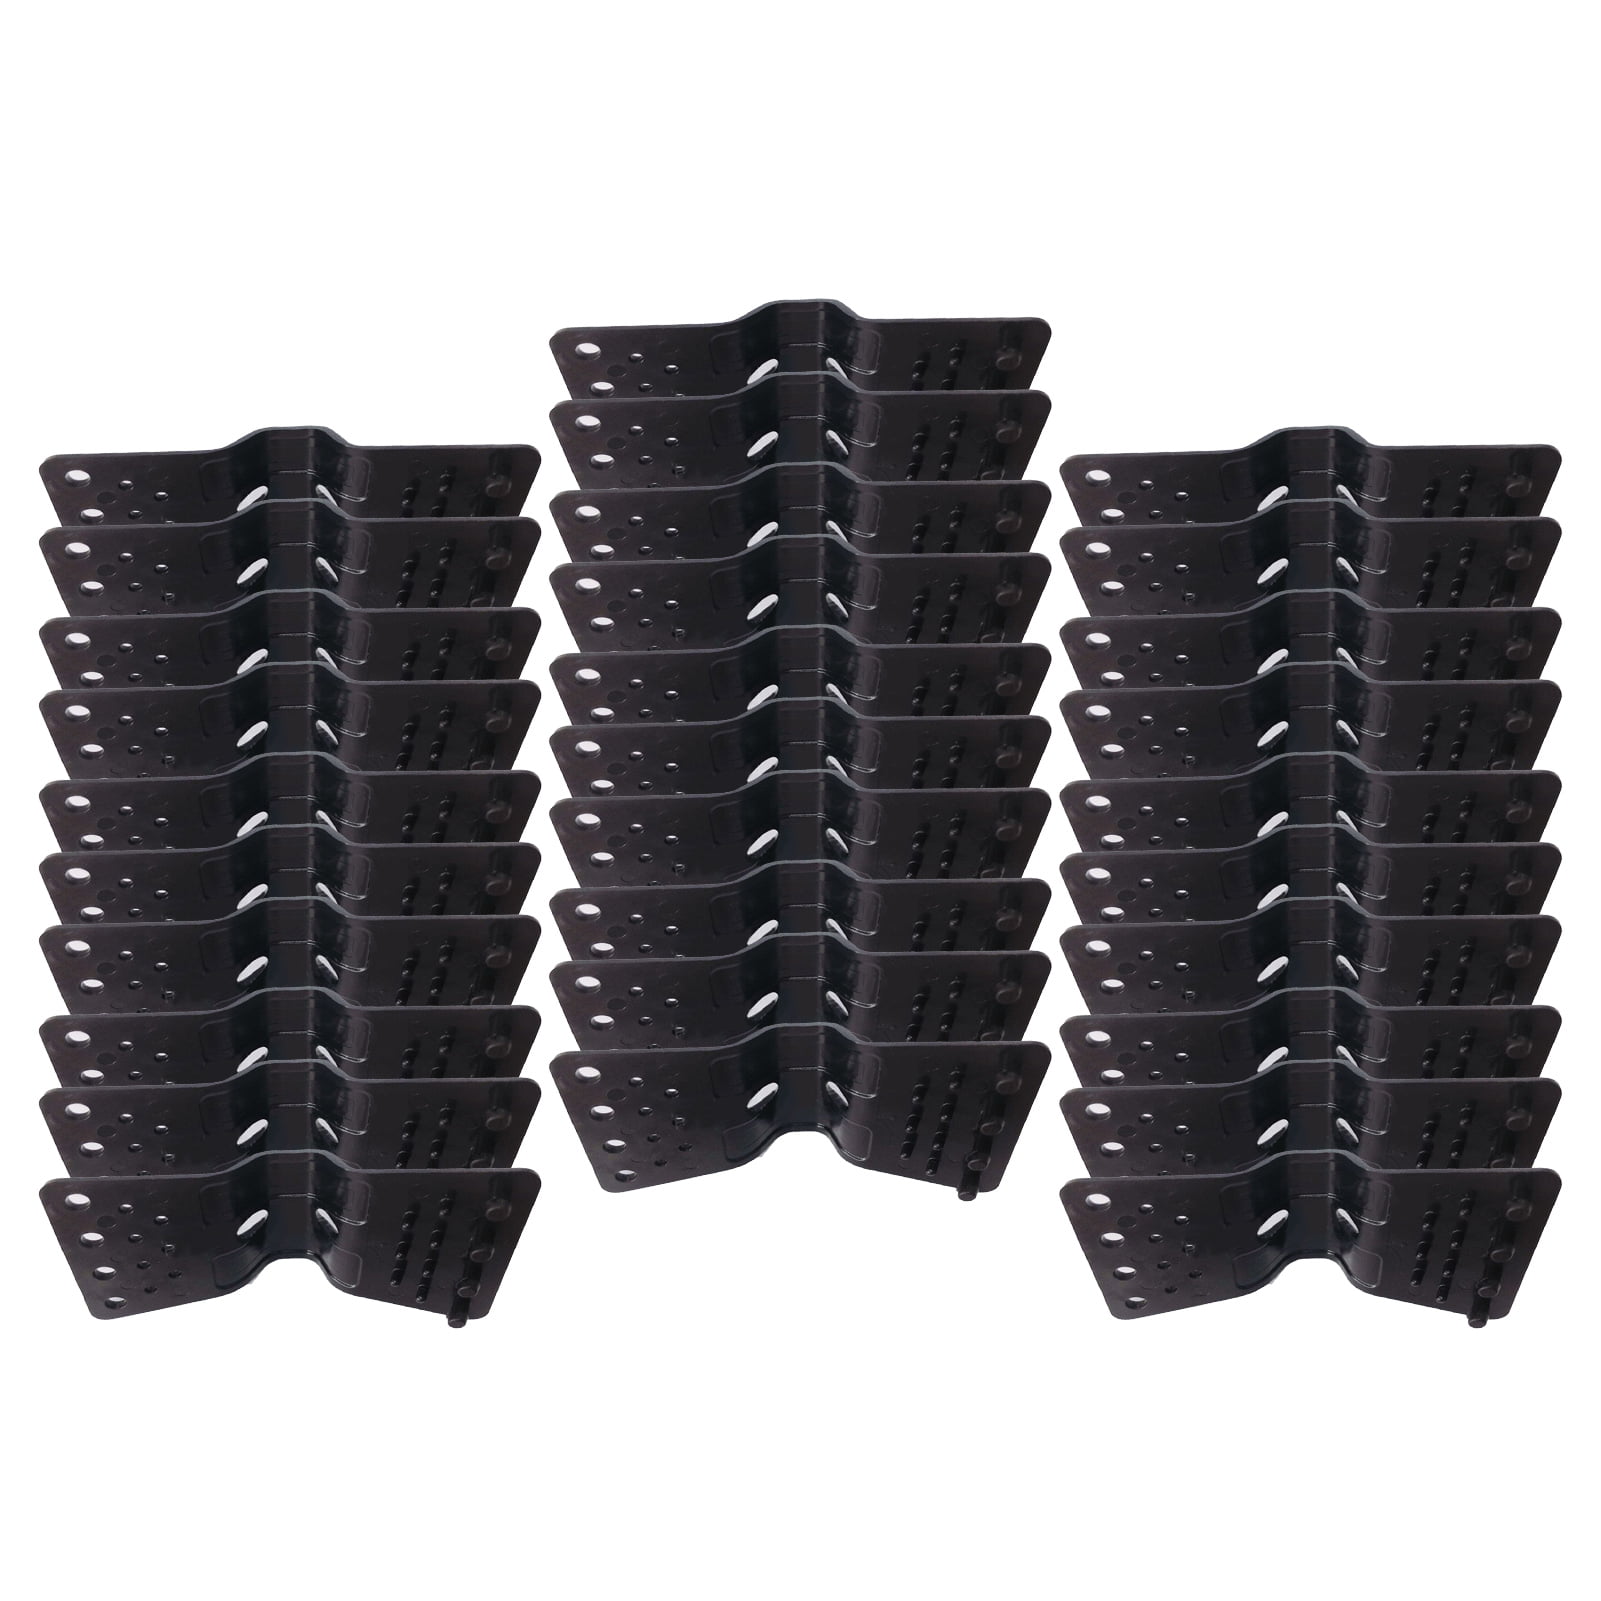 Black Sunshade Net Clip Plastic Clips Garden Tools Fence Shading Accessories 